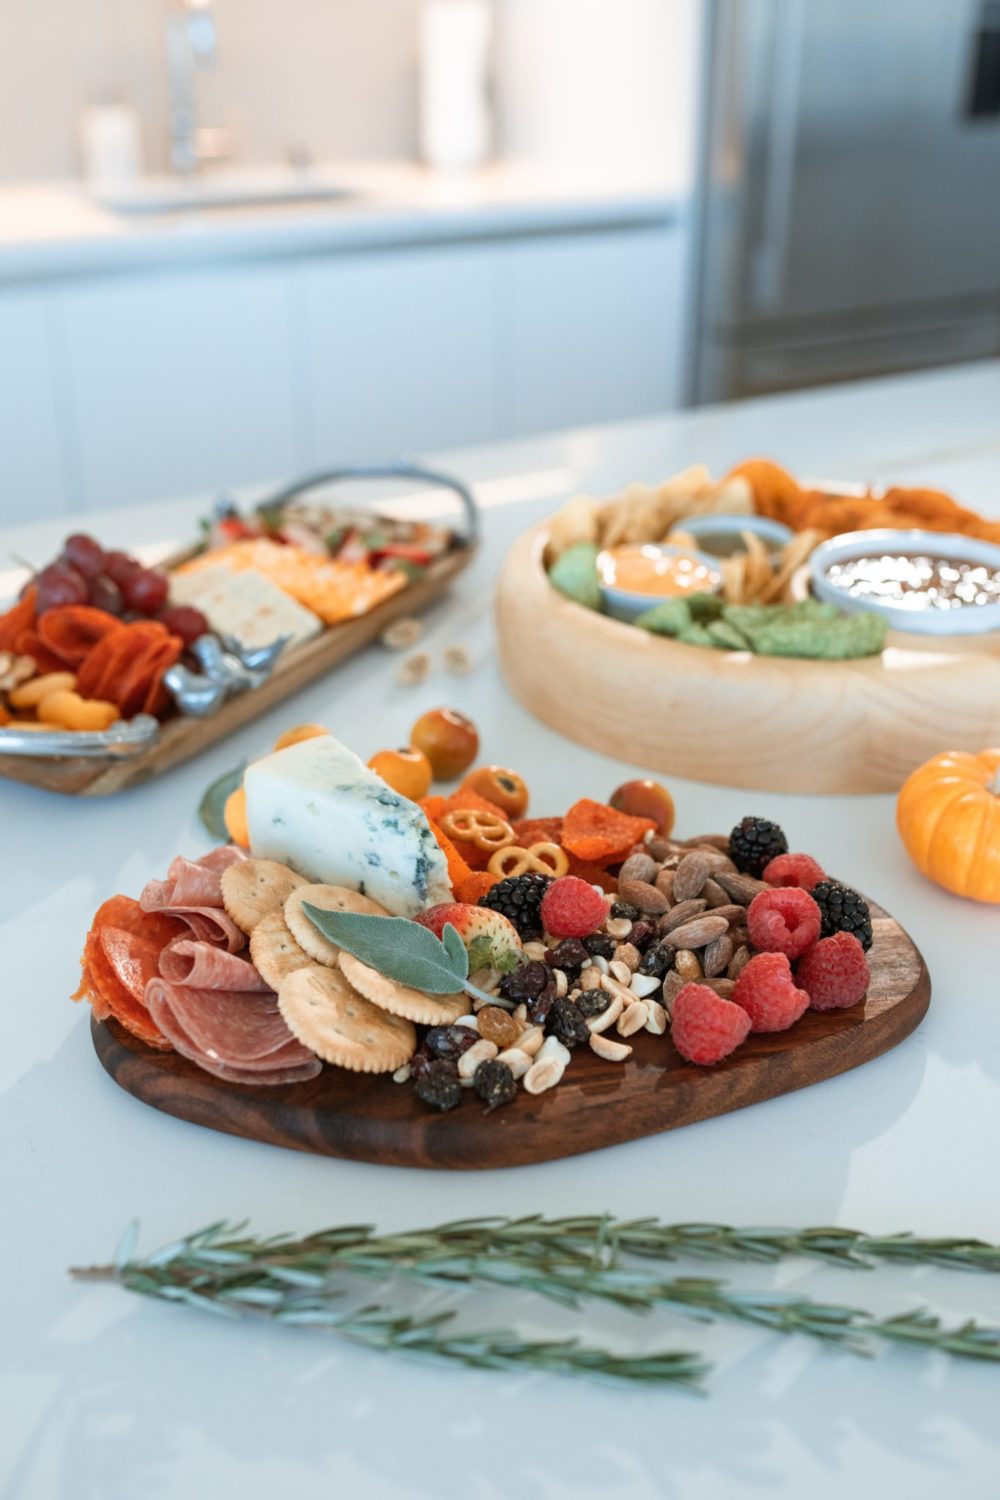 5 Appetizer Ideas That Will Wow Your Guests